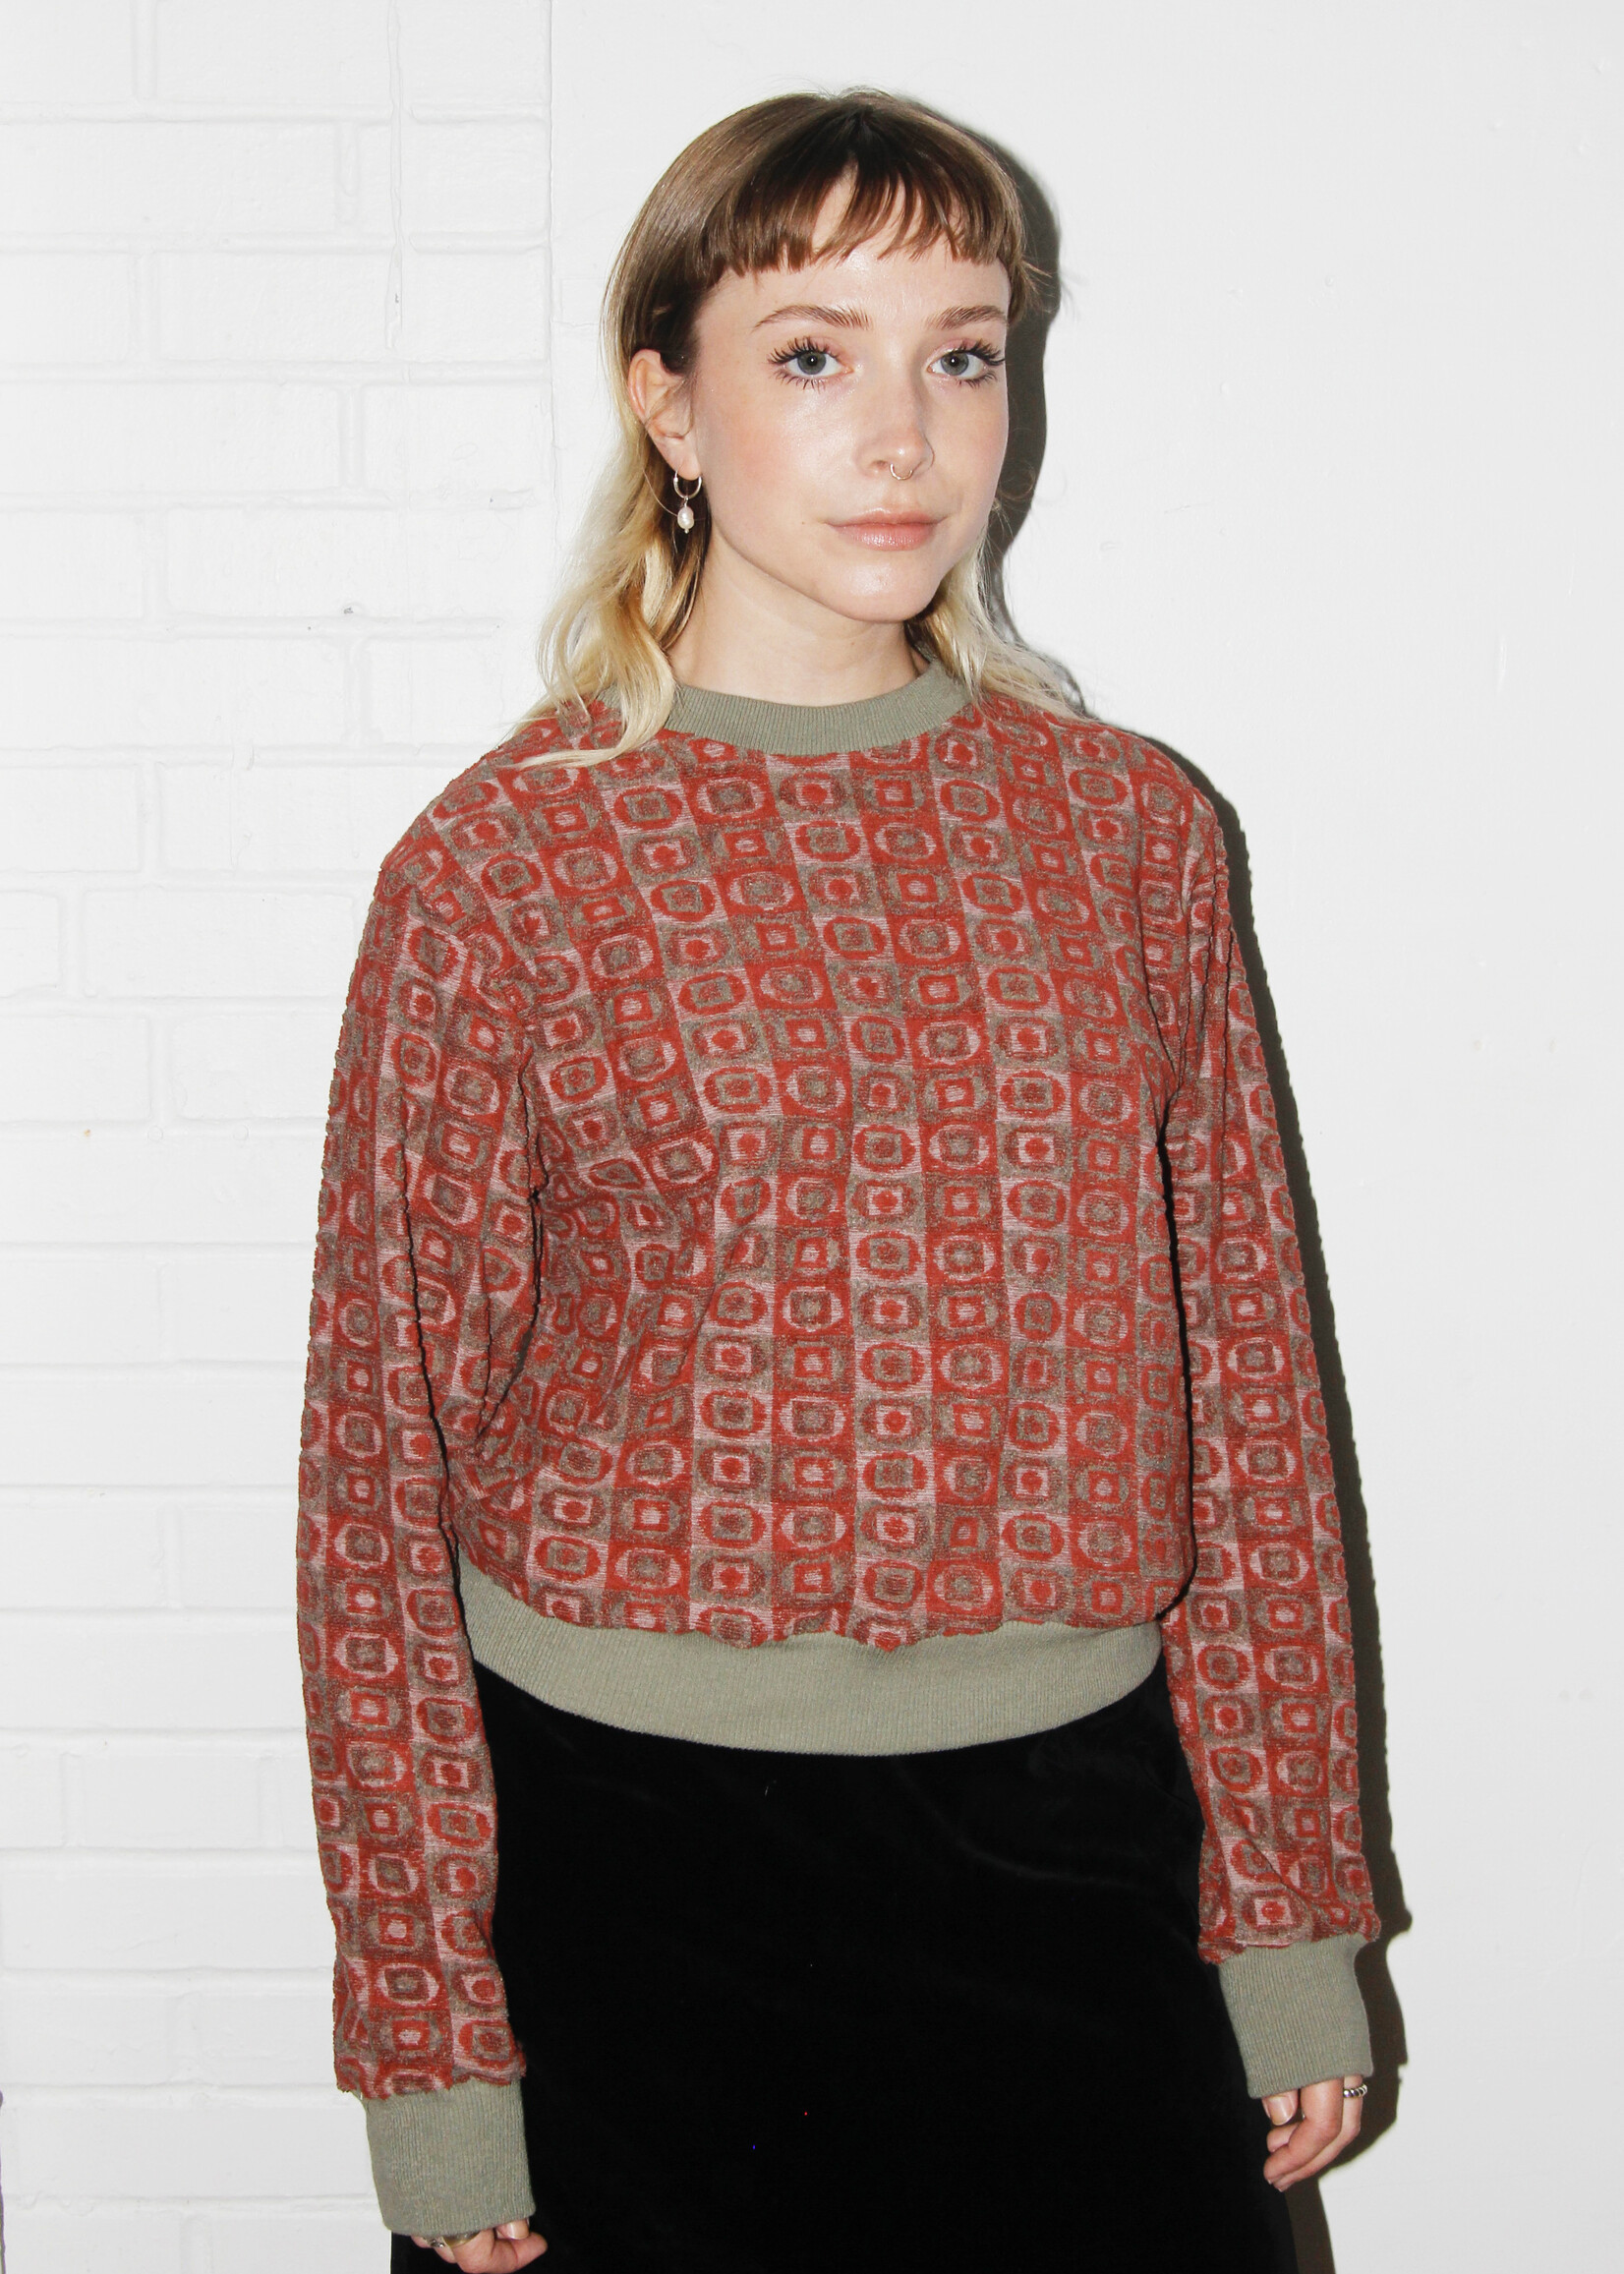 Studio Citizen Studio Citizen Crewneck Sweater in Rust Towel Print. Available at our Mile End Shop!! Email to order.